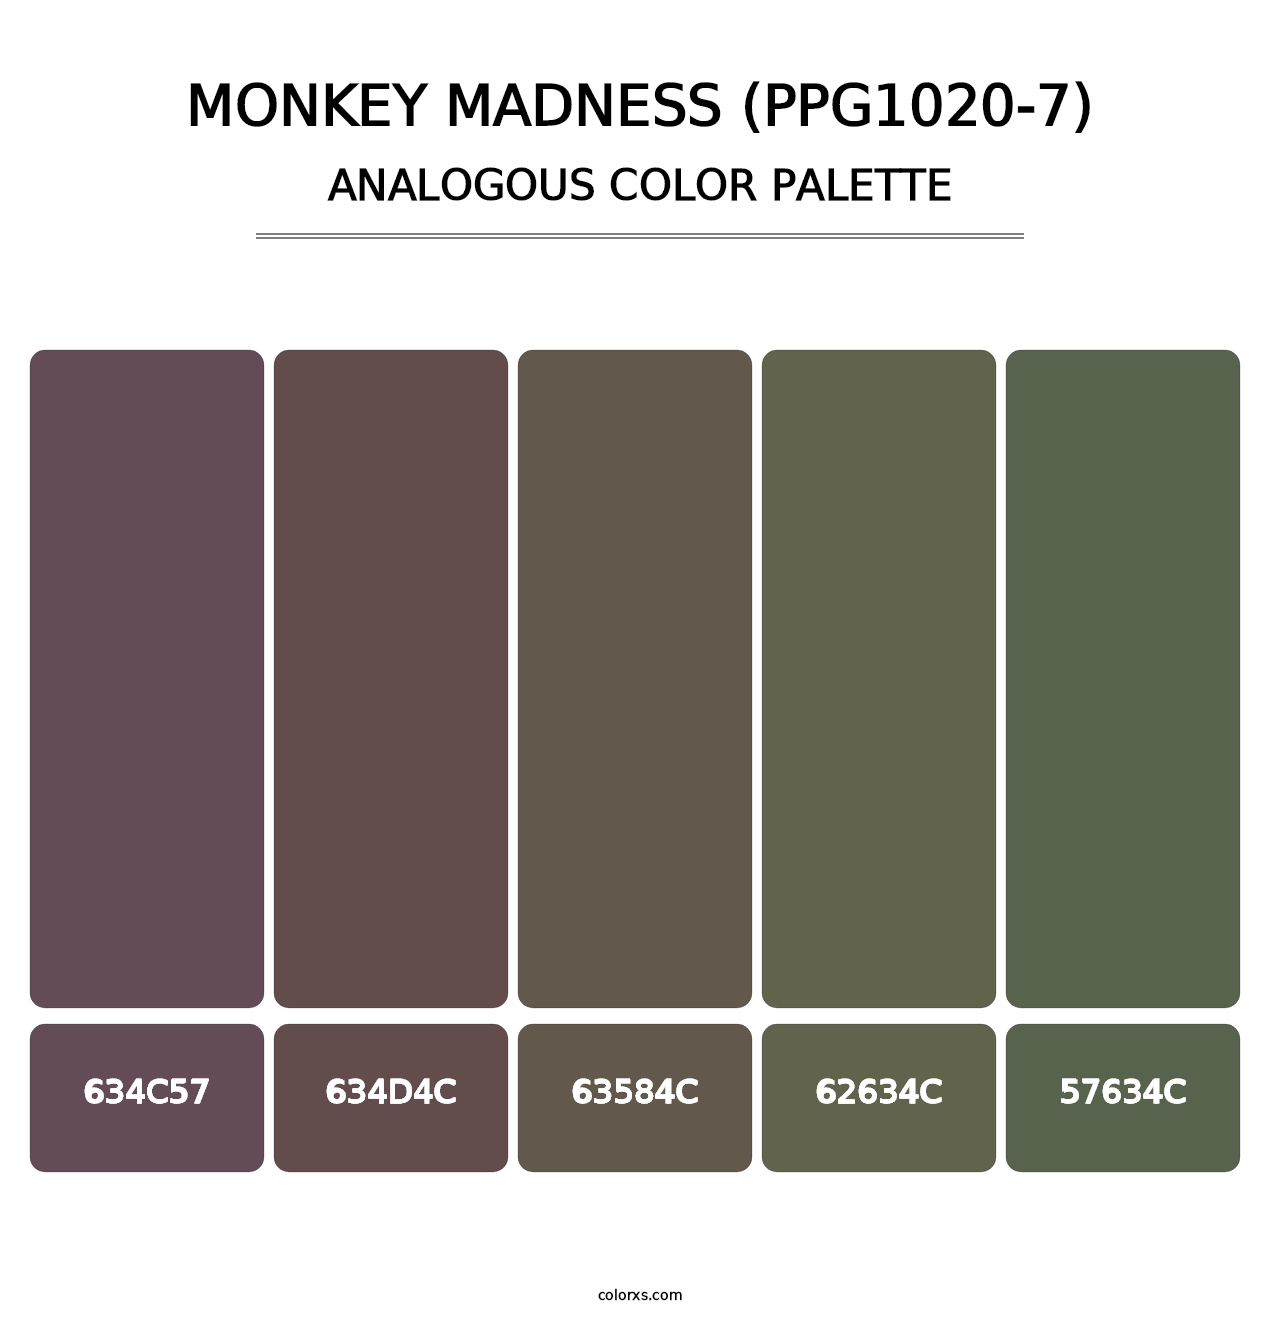 Monkey Madness (PPG1020-7) - Analogous Color Palette